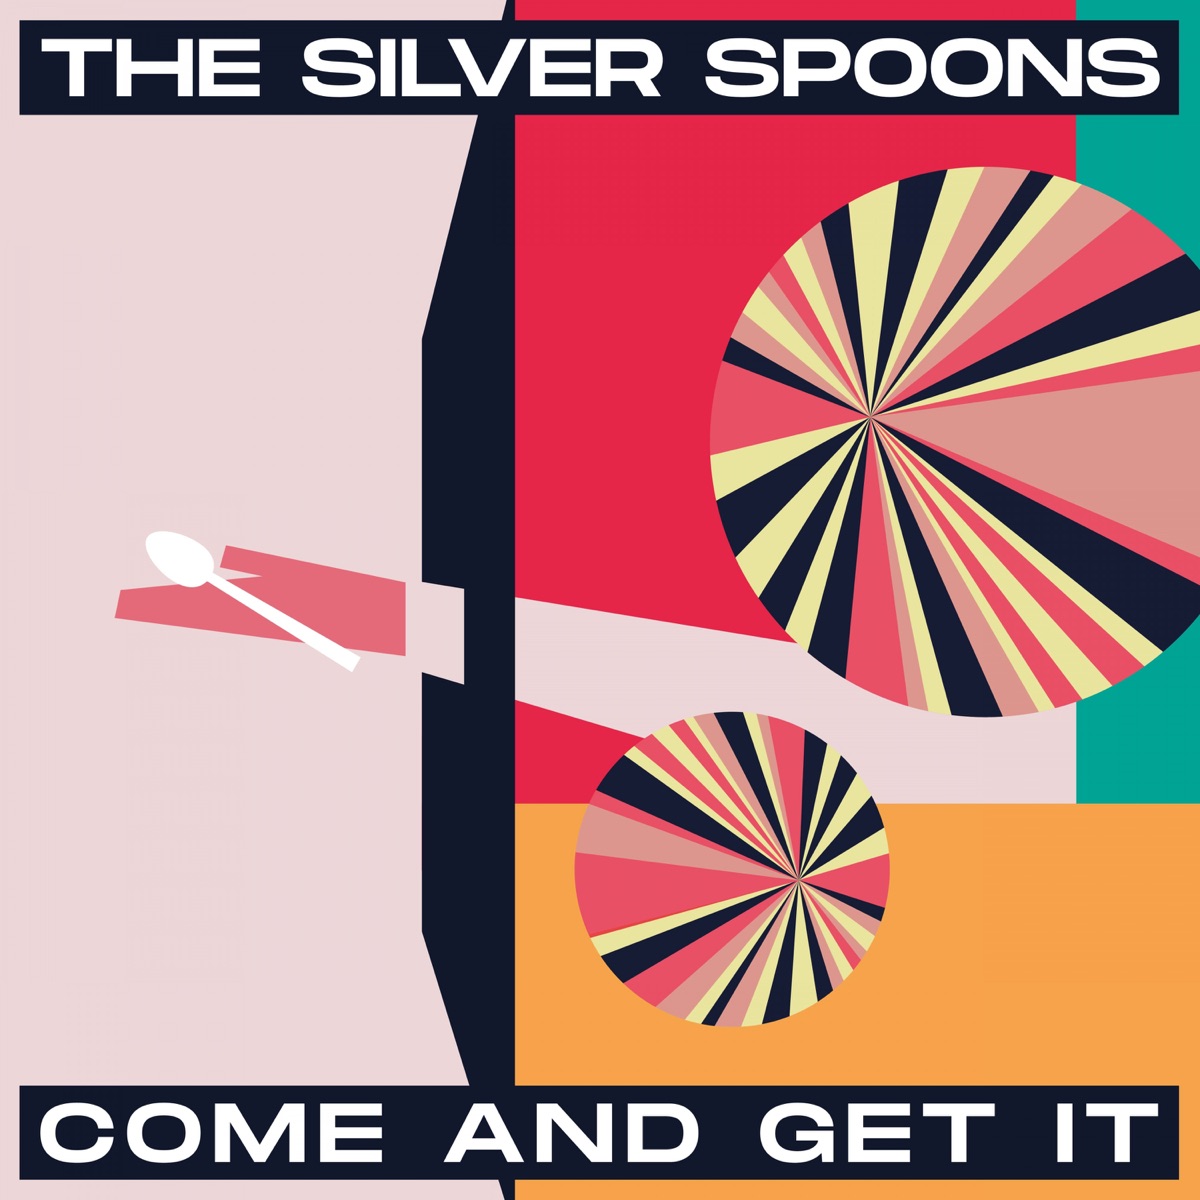 The Silver Spoons Come and Get It cover artwork